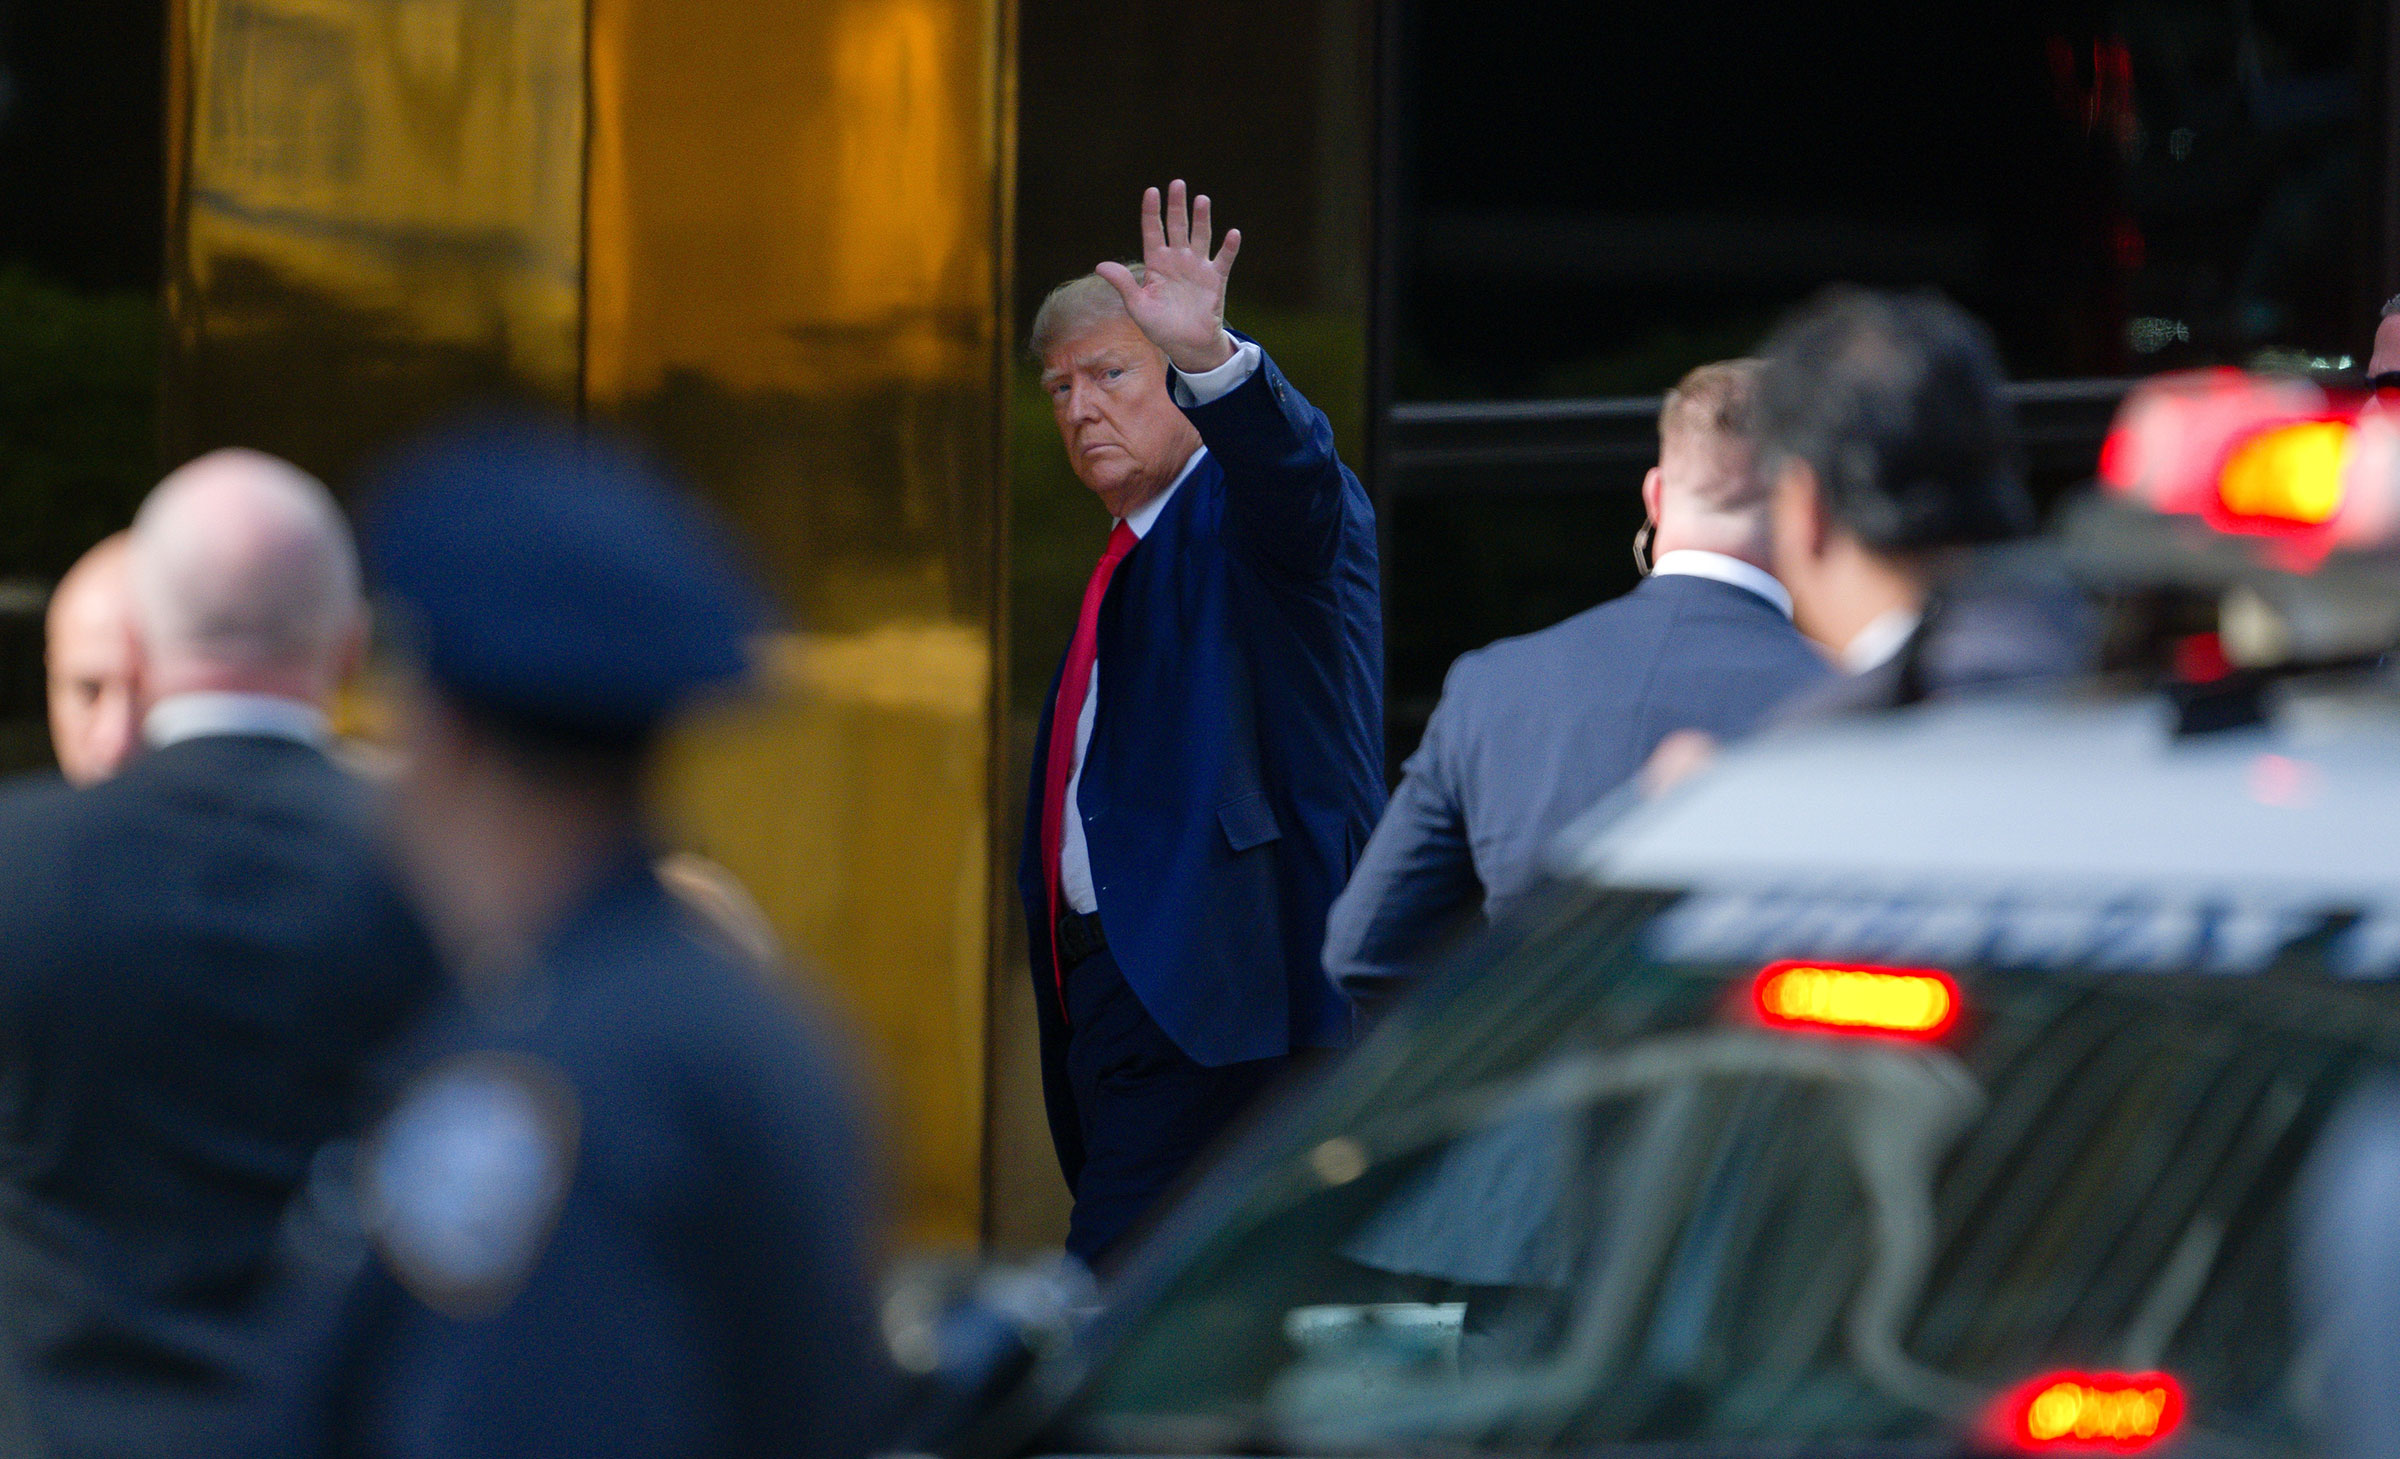 Former President Donald Trump arrives at Trump Tower in Manhattan on April 3, 2023 in New York City. (James Devaney—GC Images/Getty Images)